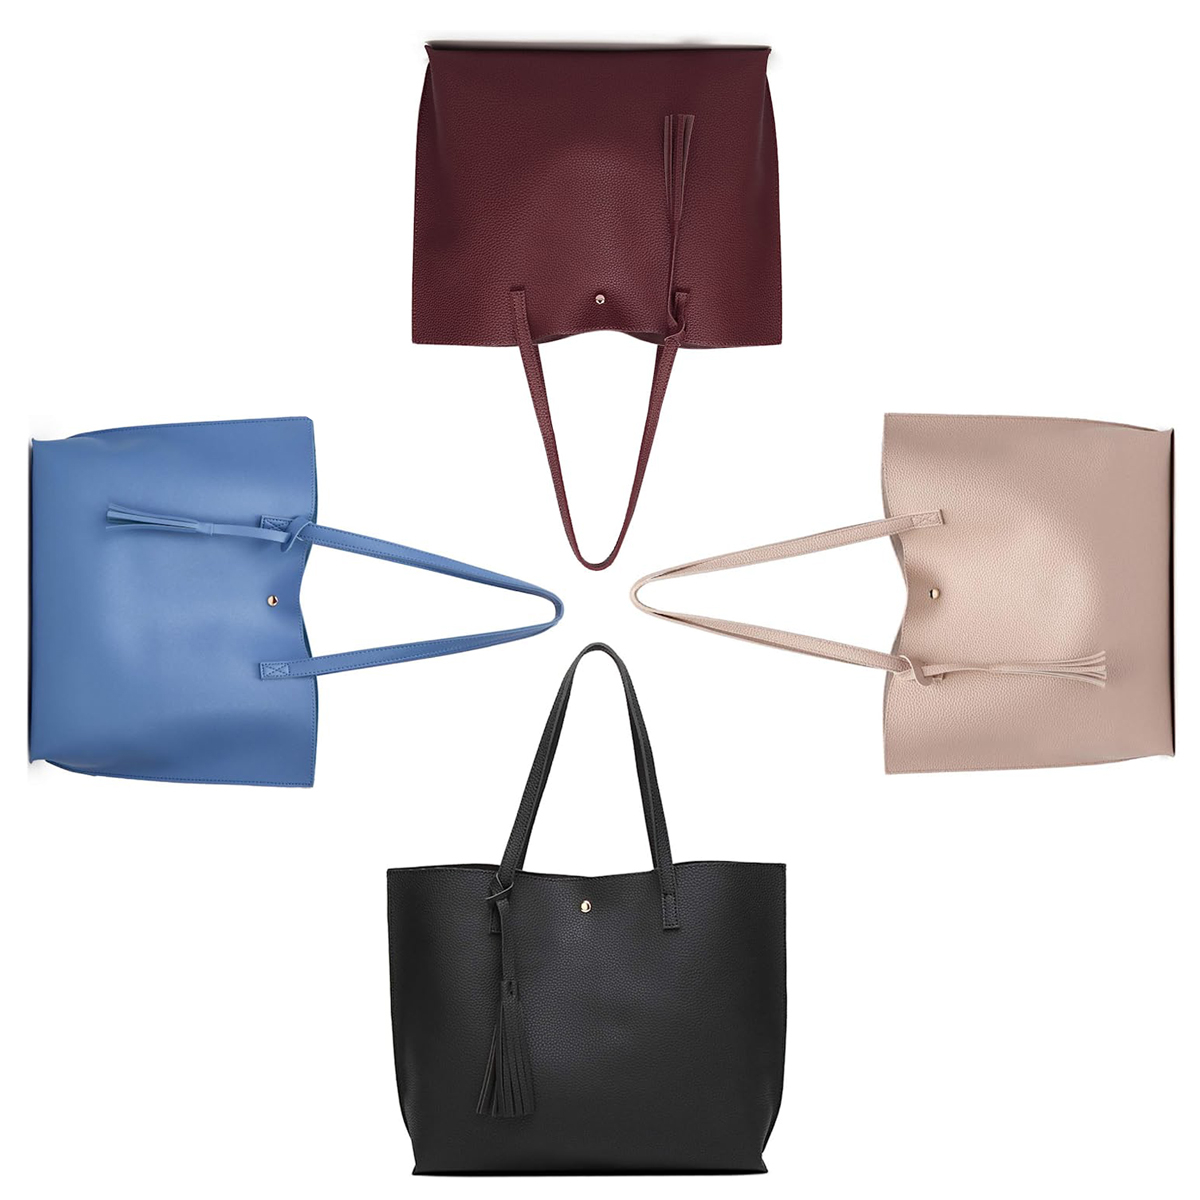 This bestselling tote bag comes in 160 colors and is on sale for under $20!  - Good Morning America